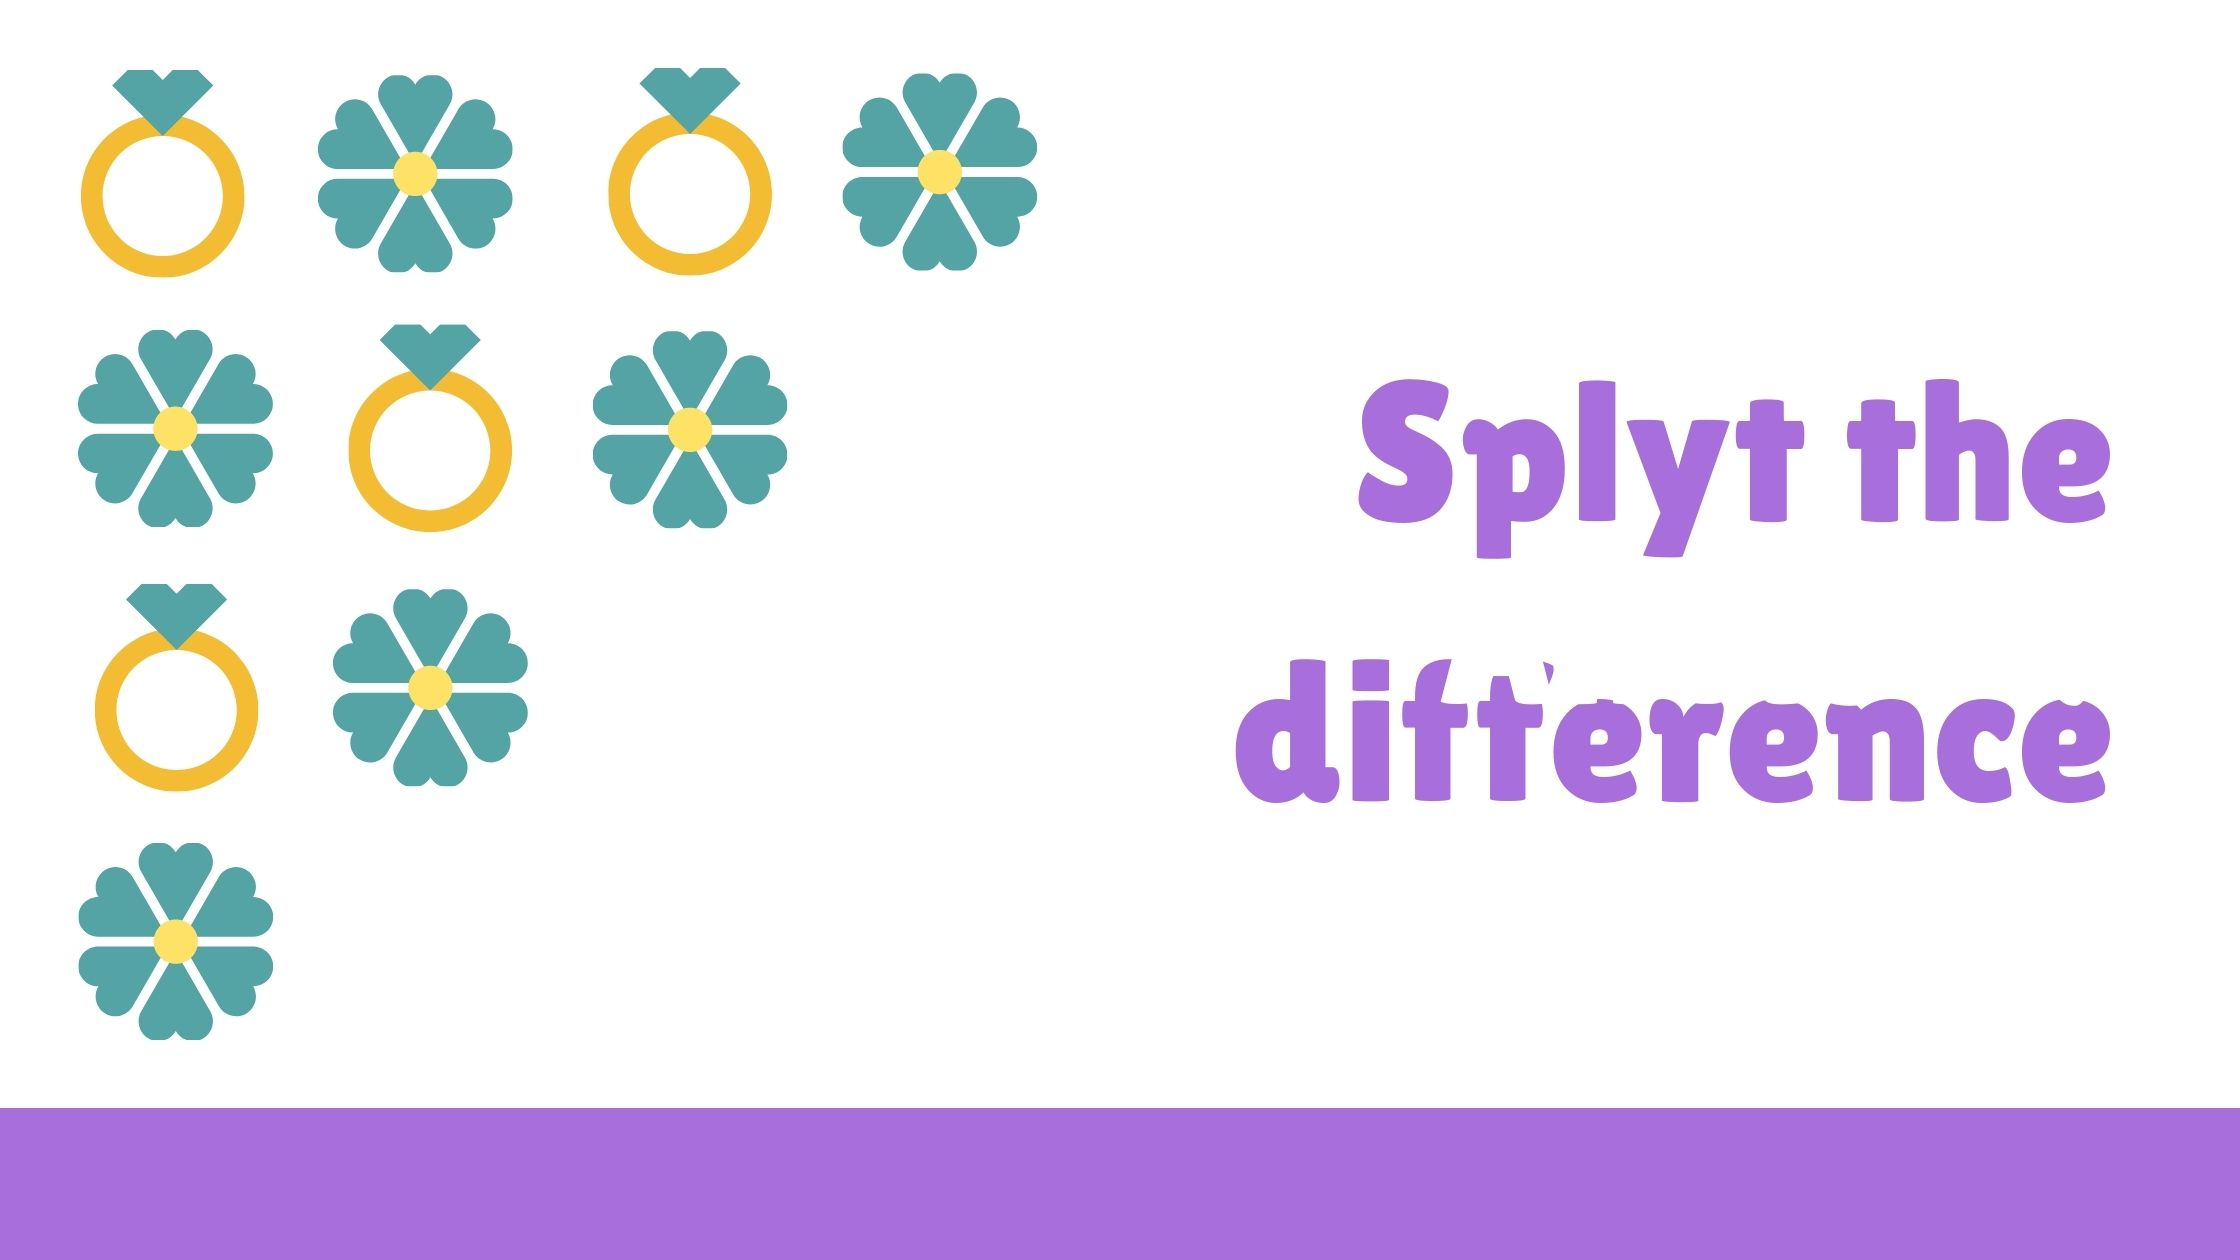 Splyt the difference